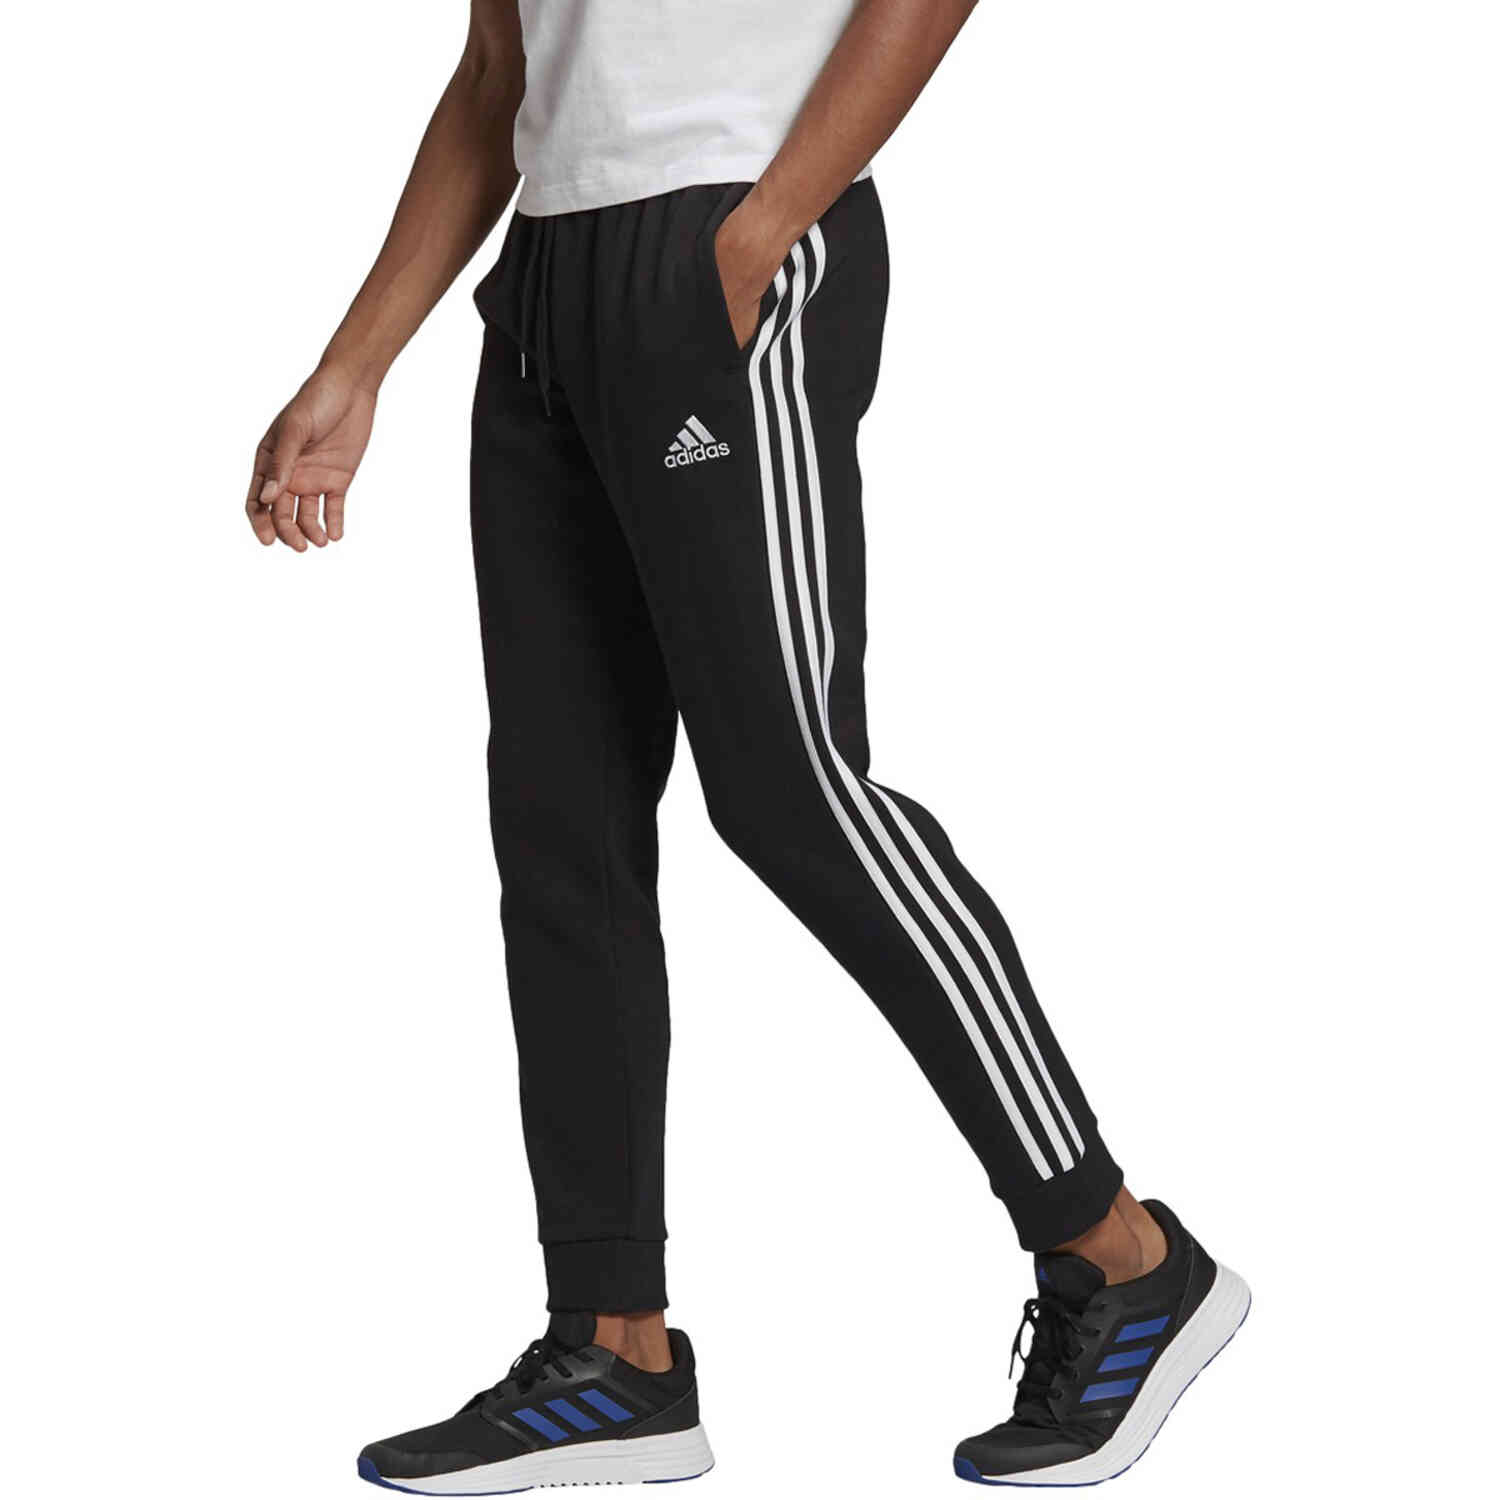 adidas Essential Logo Track Pant | Cool outfits for men, Adidas outfit,  Pants